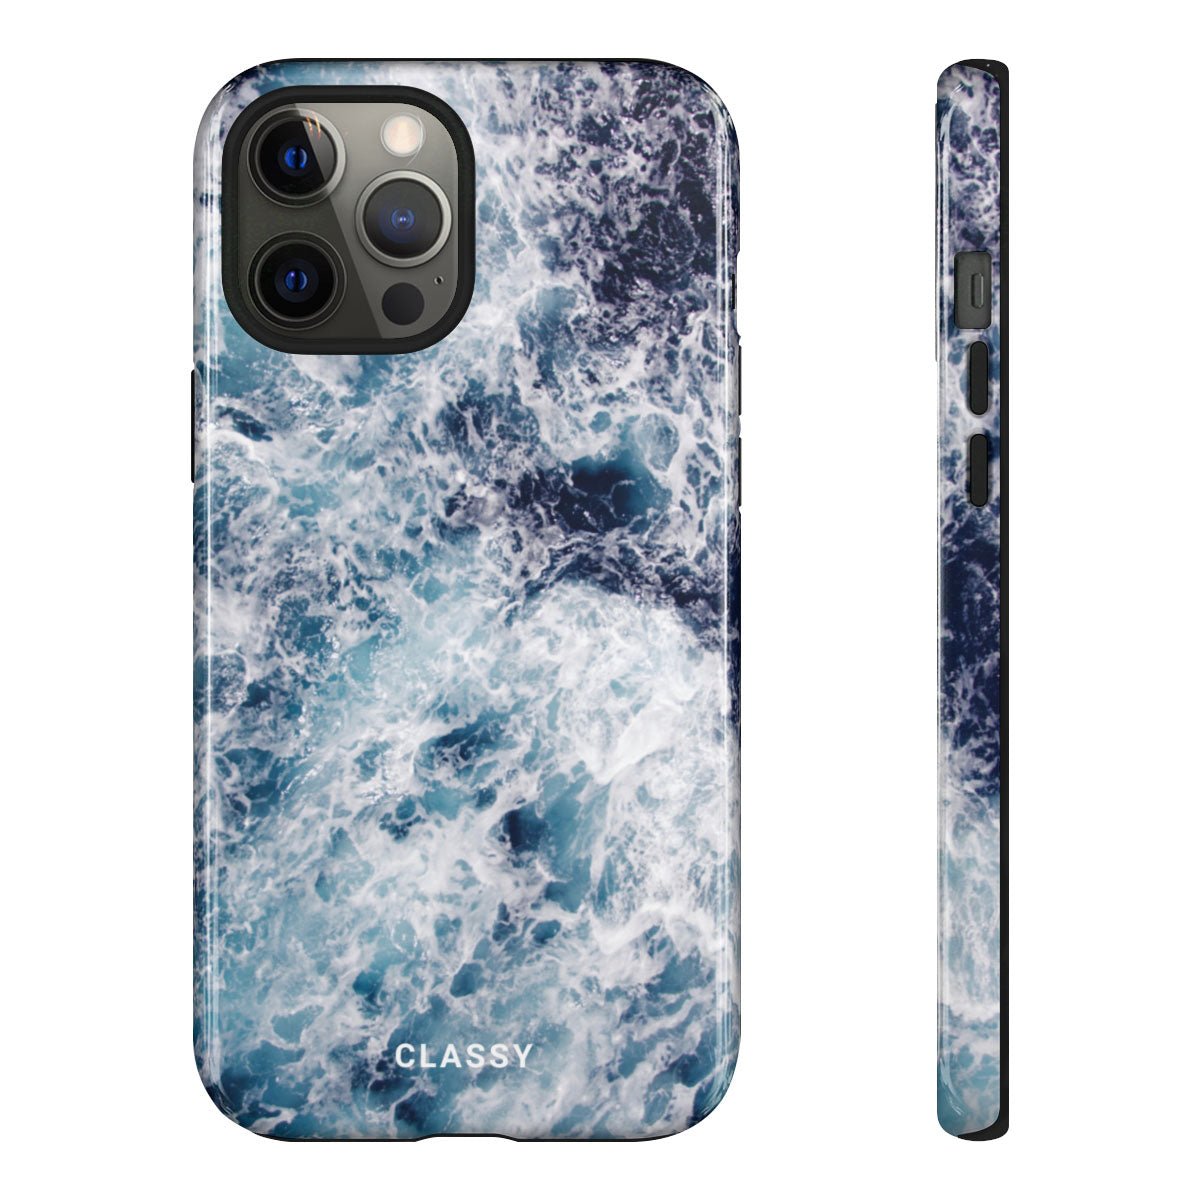 Ocean Tough Case - Classy Cases - Phone Case - iPhone 12 Pro Max - Glossy -